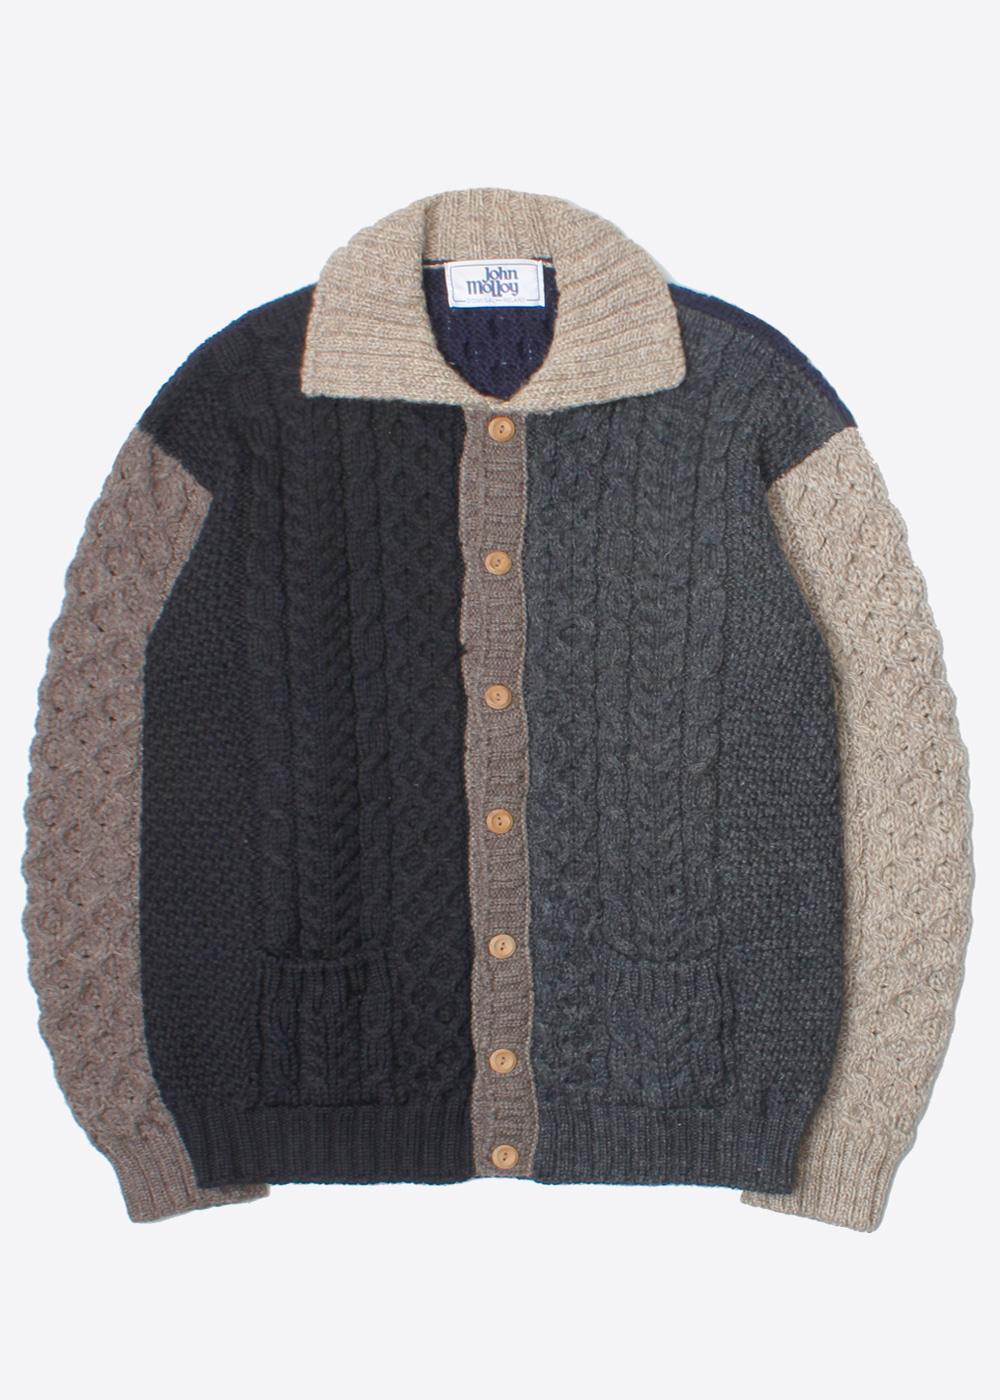 JOHN MOLLOY’over fit’cable heavy wool knit cardigan